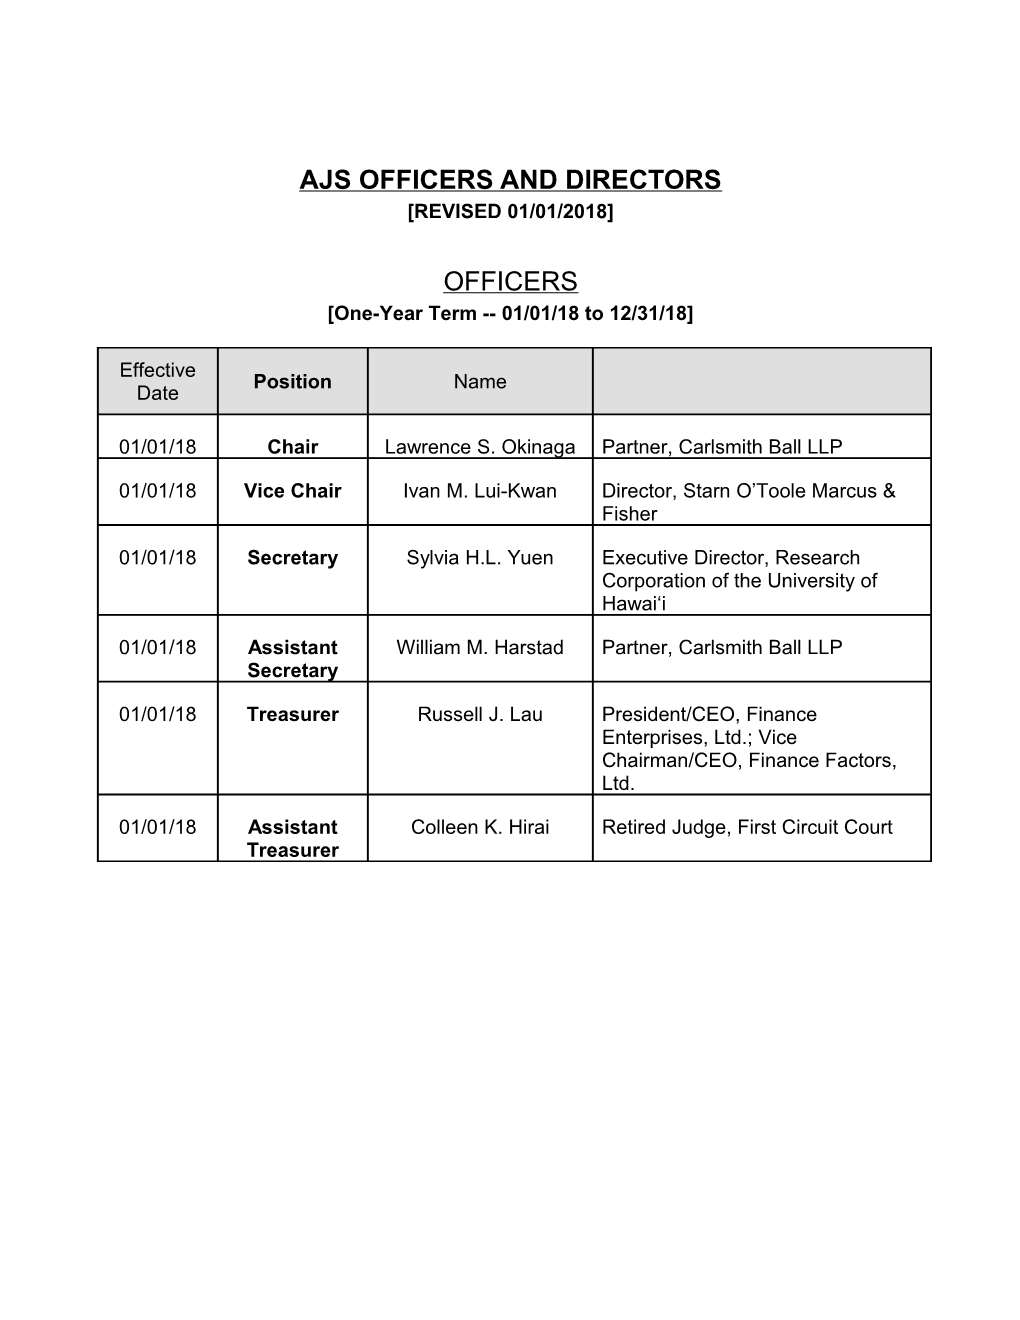 AJS Officers (Effective 1/1/11)